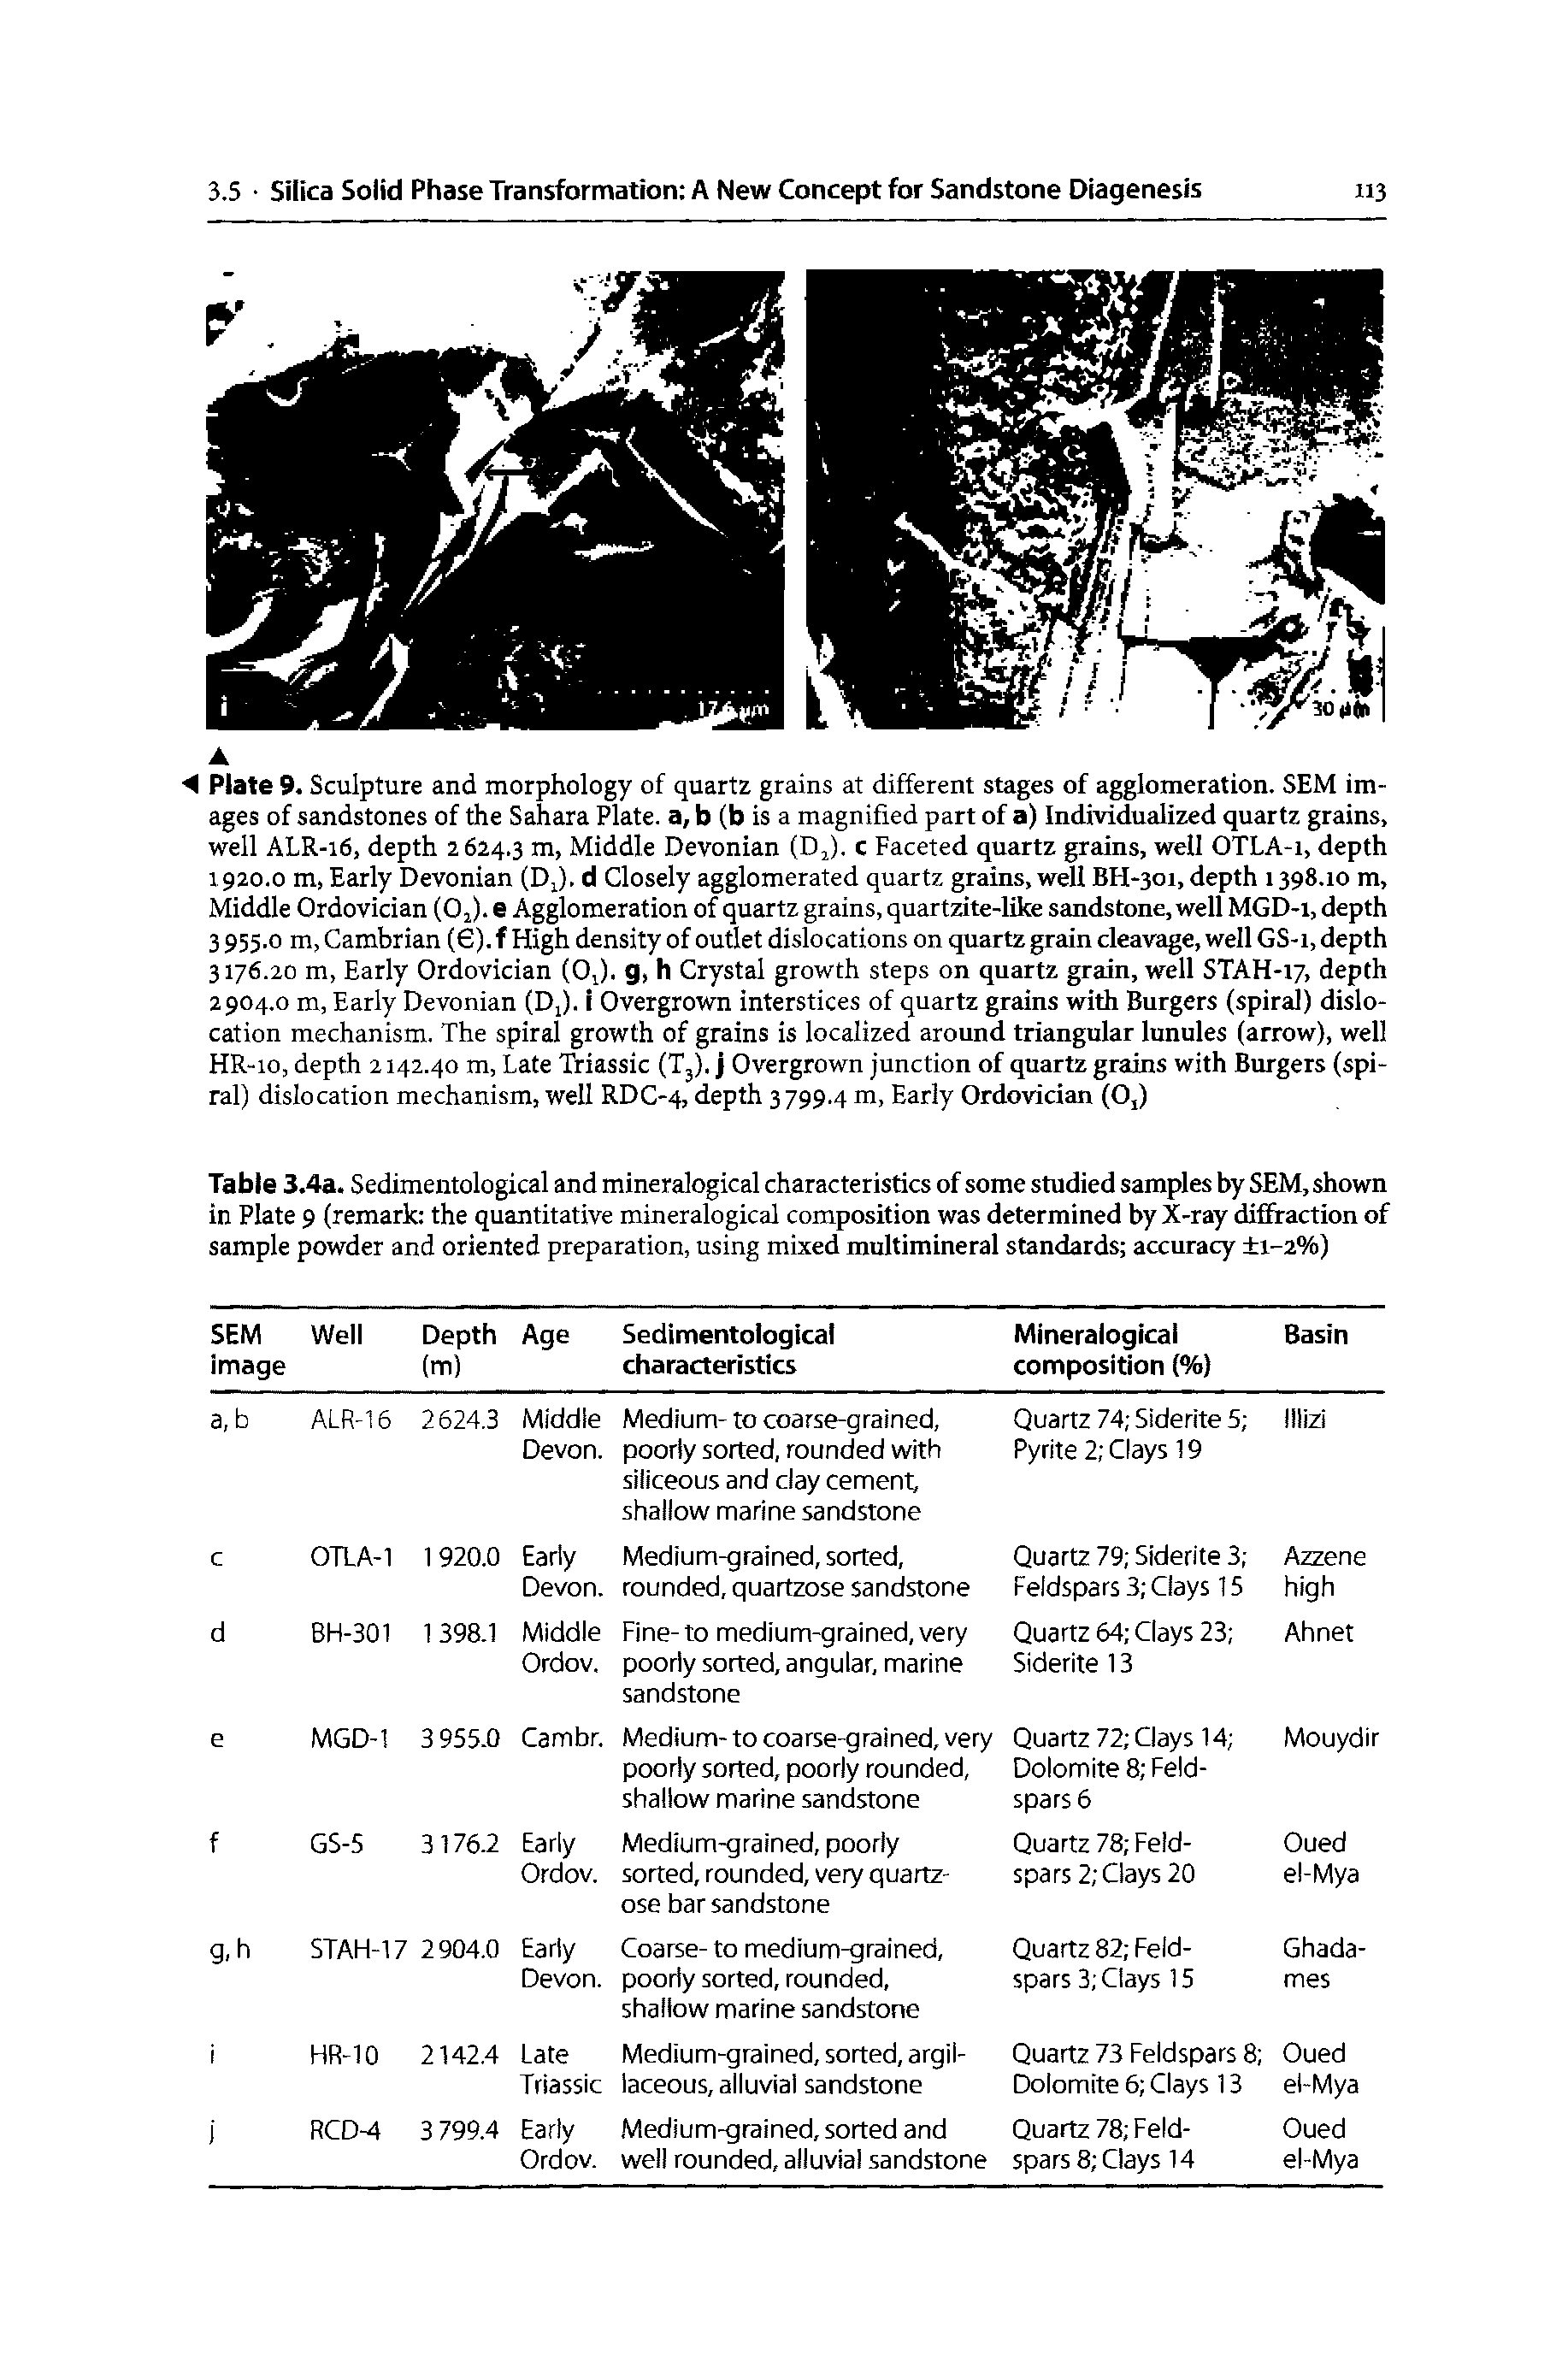 Table 3.4a. Sedimentological and mineralogical characteristics of some studied samples by SEM, shown in Plate 9 (remark the quantitative mineralogical composition was determined by X-ray diffraction of sample powder and oriented preparation, using mixed multimineral standards accuracy 1-2%)...